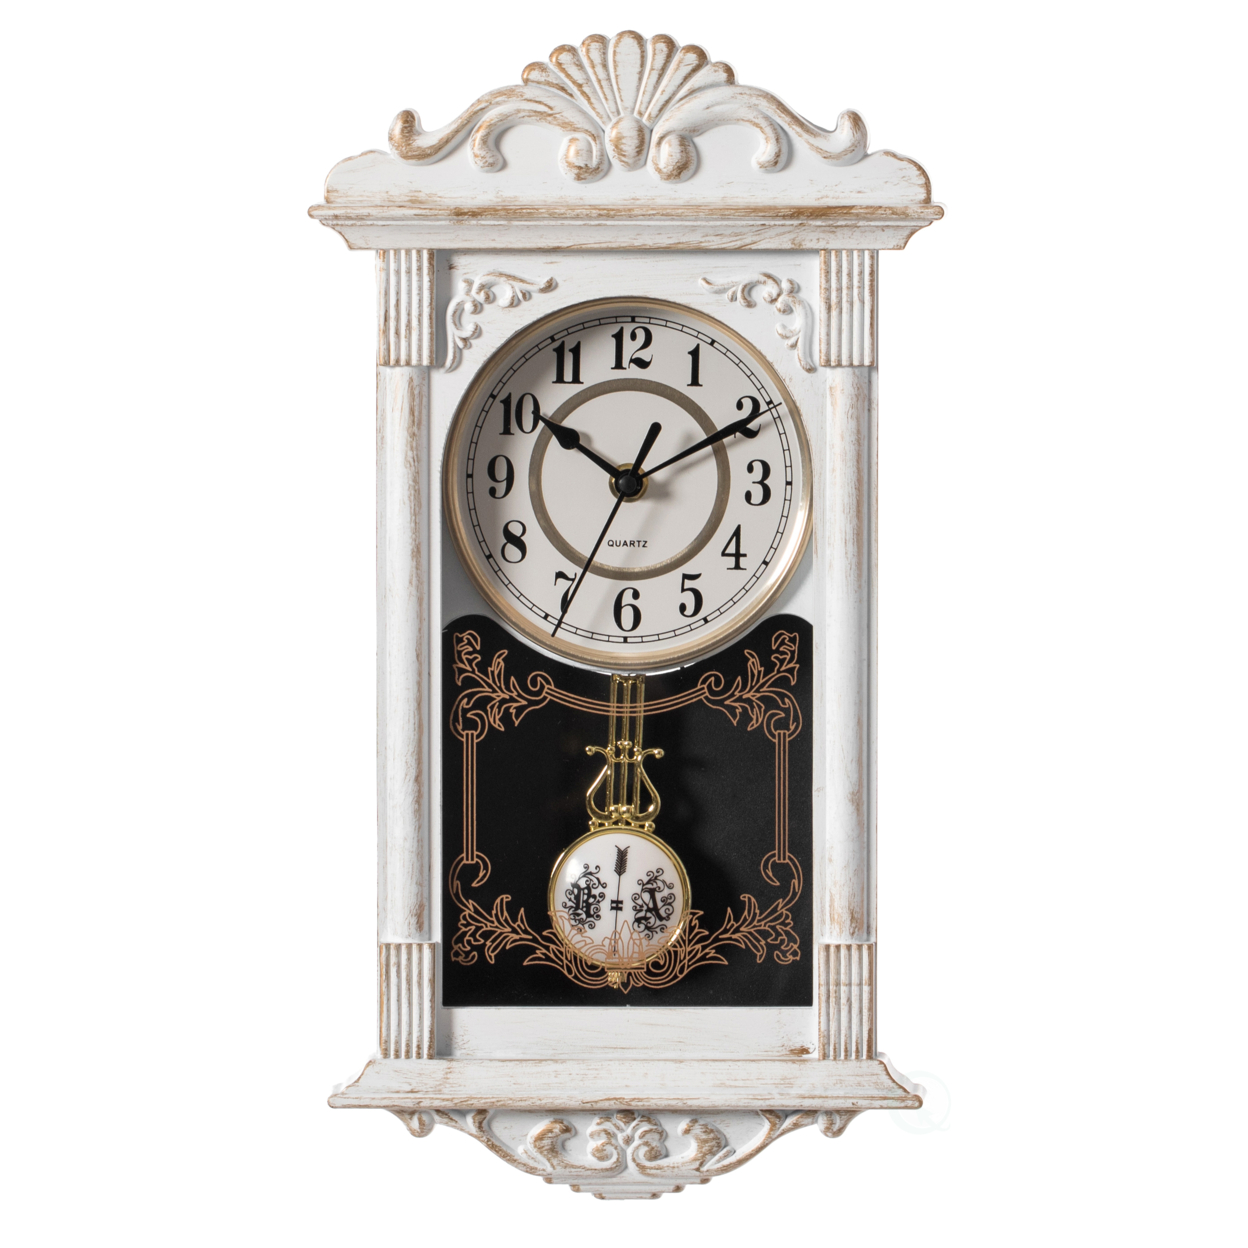 Vintage Grandfather Wood- Looking Plastic Pendulum Wall Clock For Living Room, Kitchen, Or Dining Room - White, 16 Inch Heigh